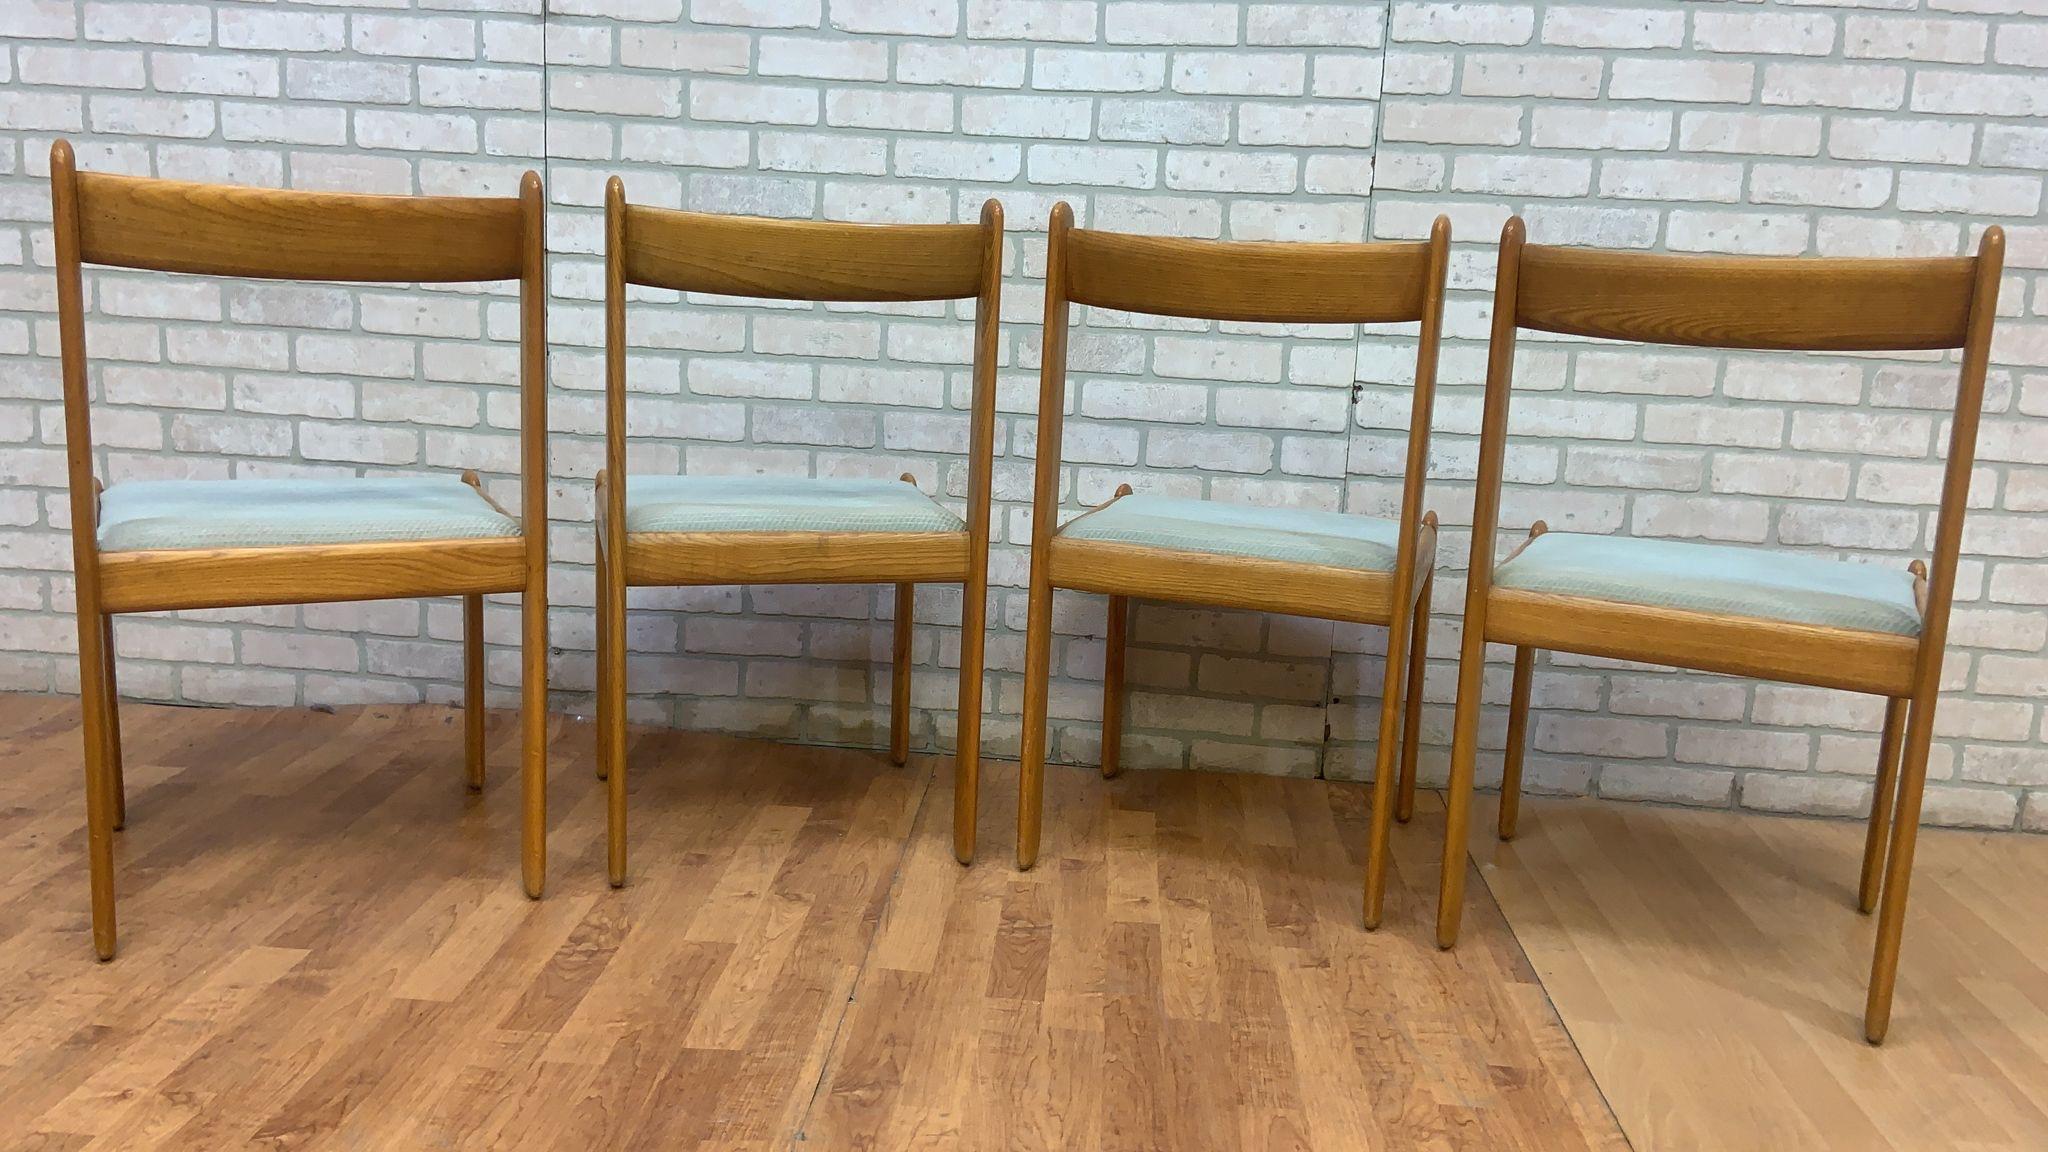 Vintage Italian Modern Vico Magistretti Style Blonde Beech Wood Chairs -Set of 4 For Sale 2